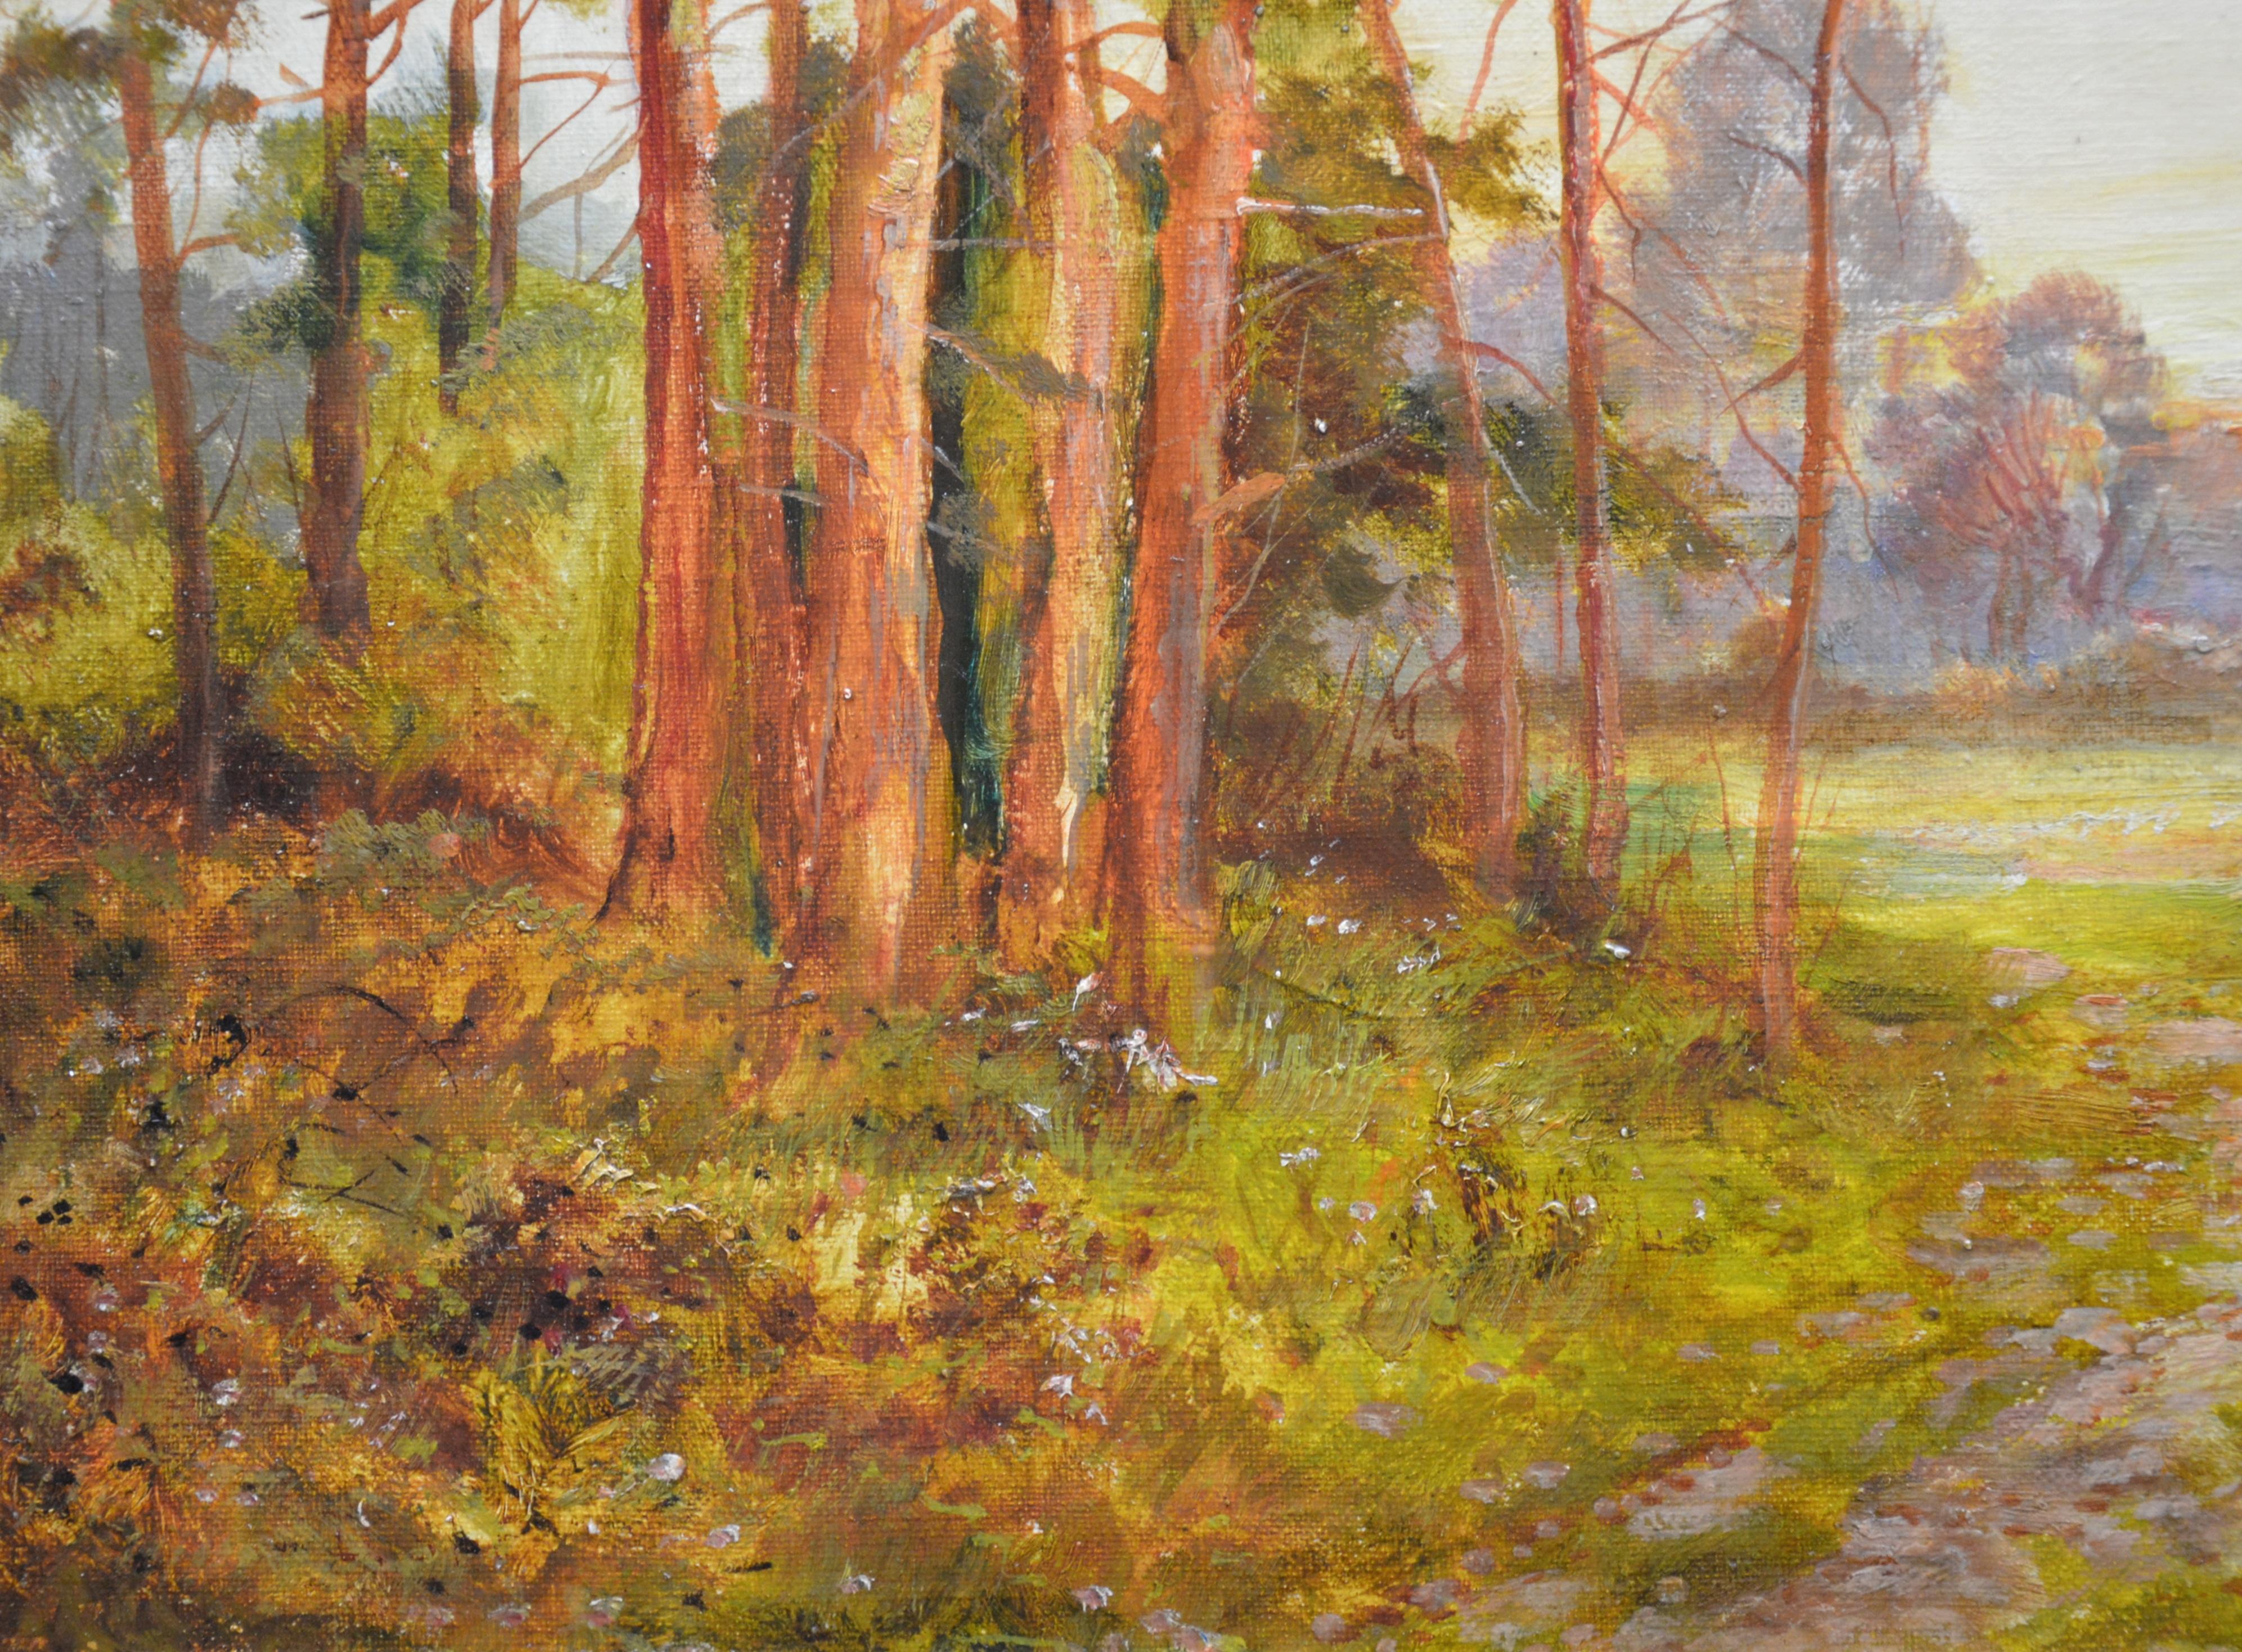 Golden Rays of Autumn - 19th Century Landscape Oil Painting Winnie the Pooh Wood - Brown Landscape Painting by Daniel Sherrin